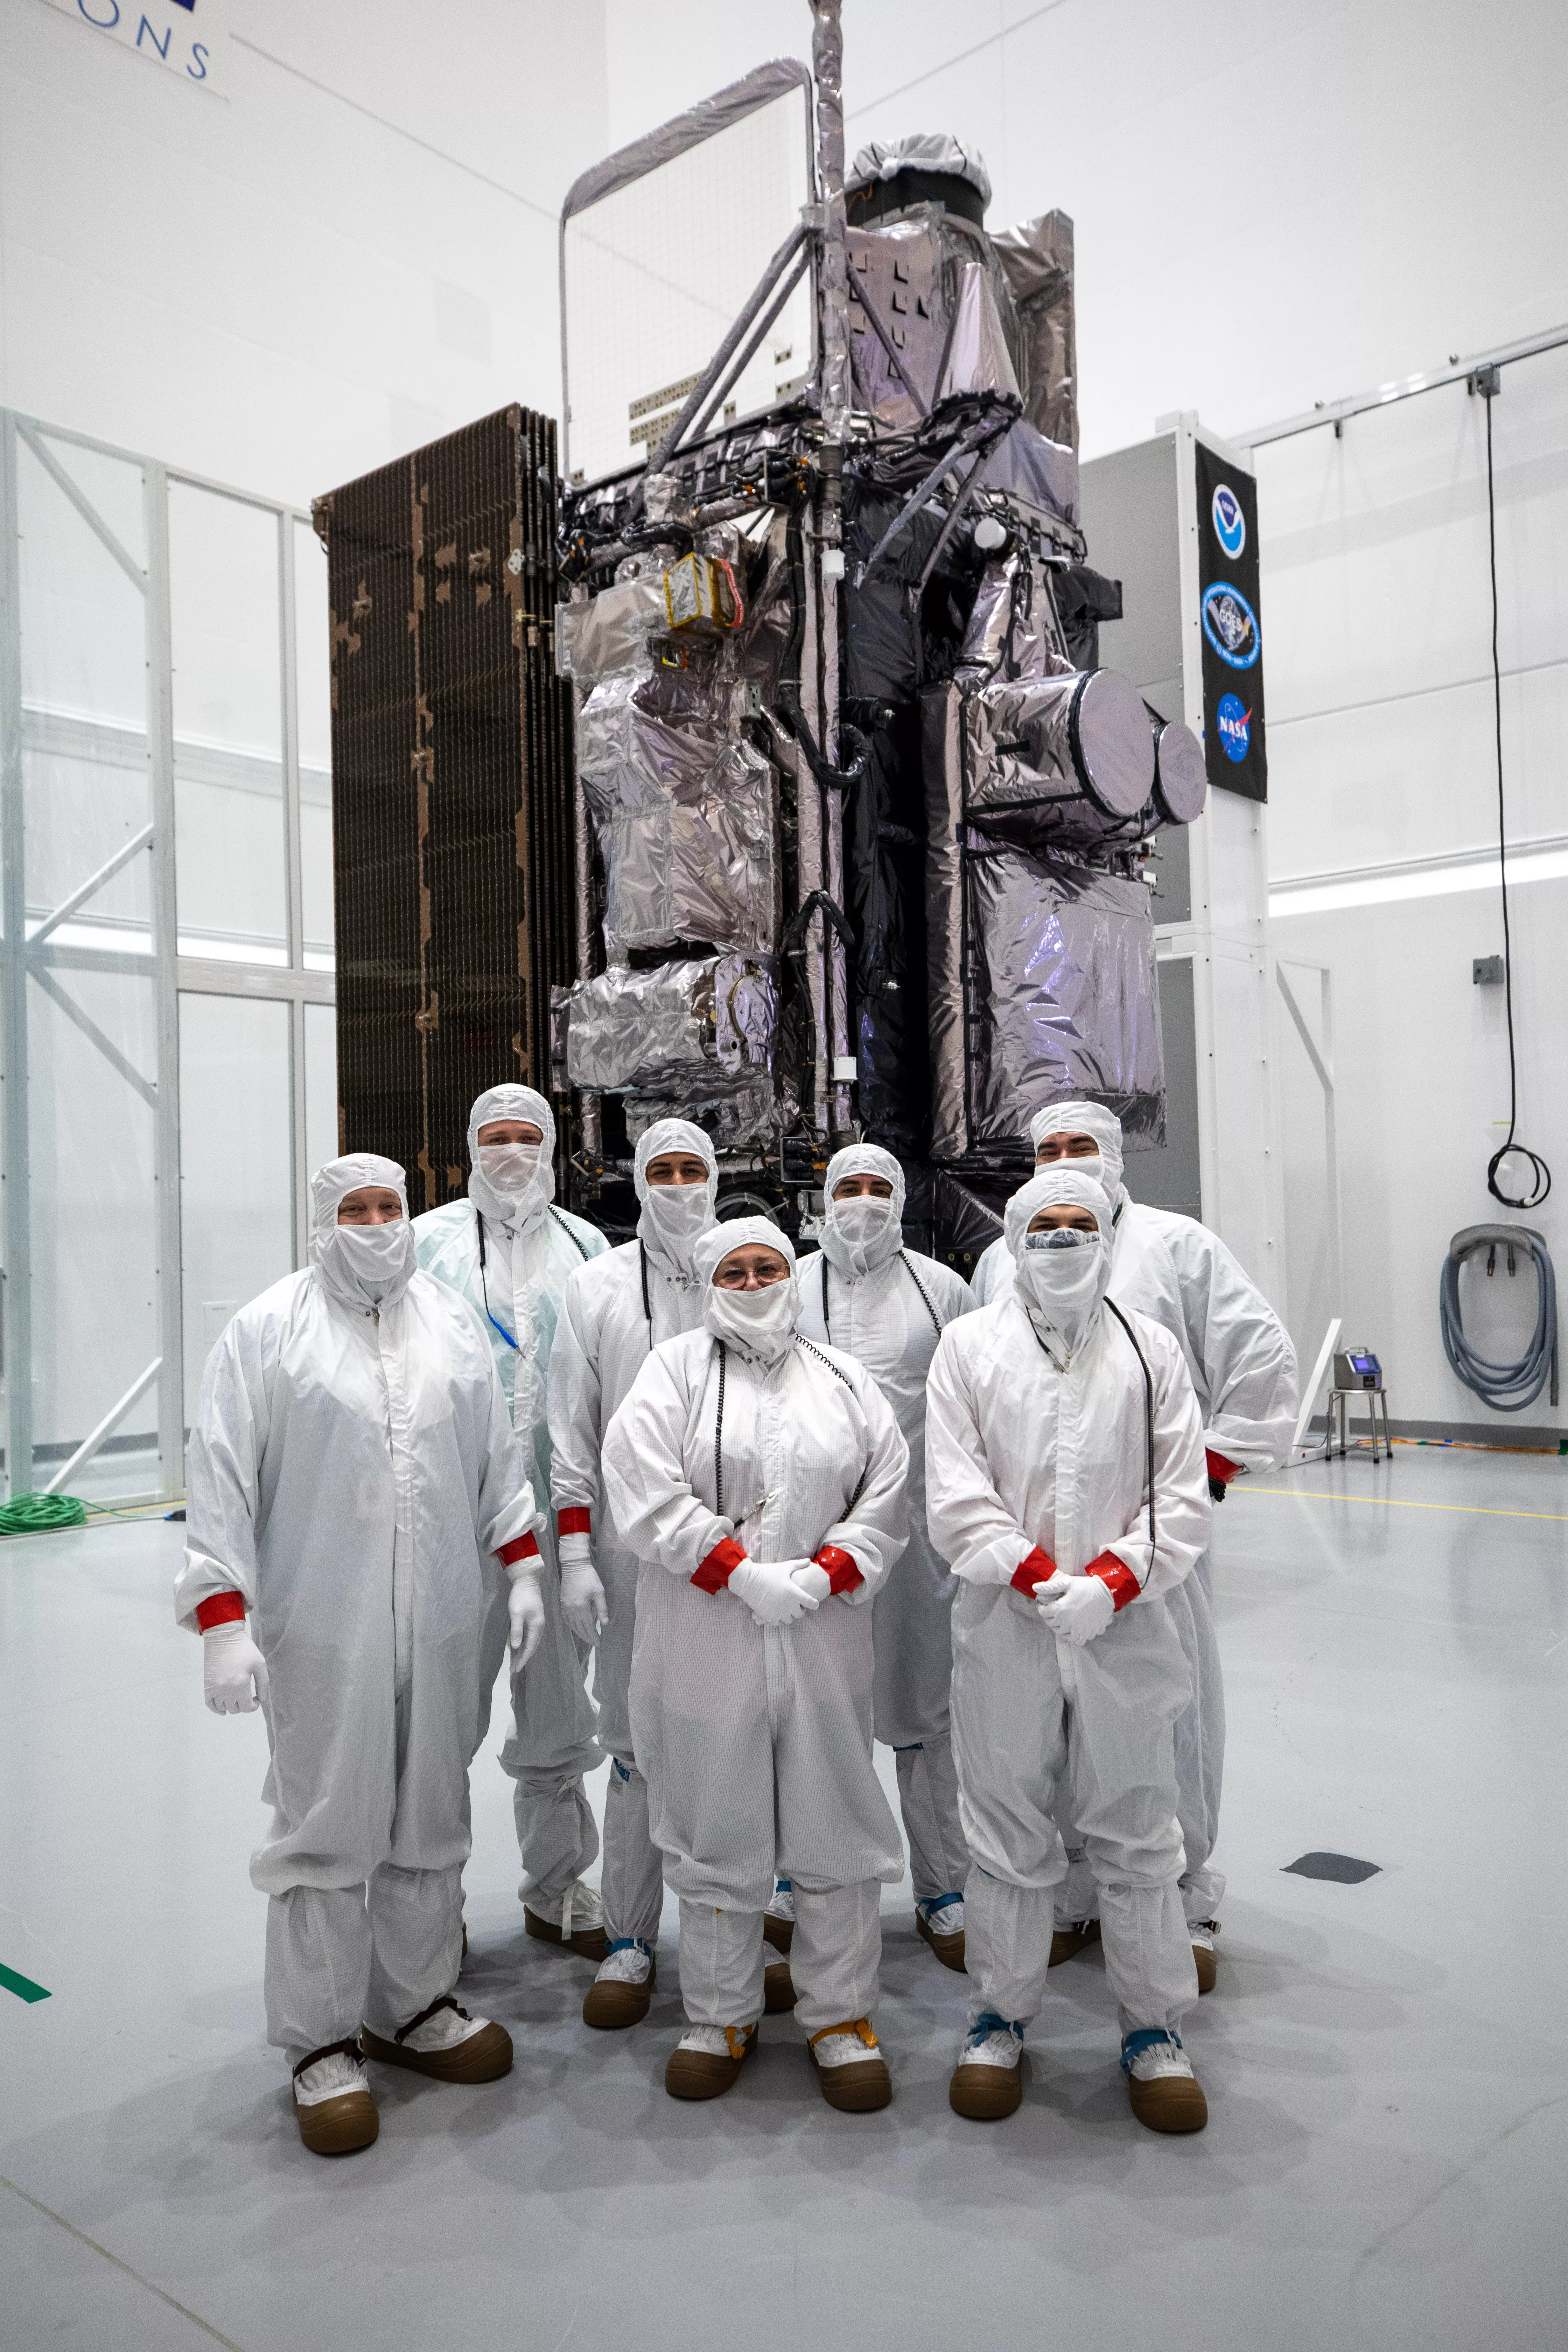 GOES-T Satellite Processing Team at Astrotech